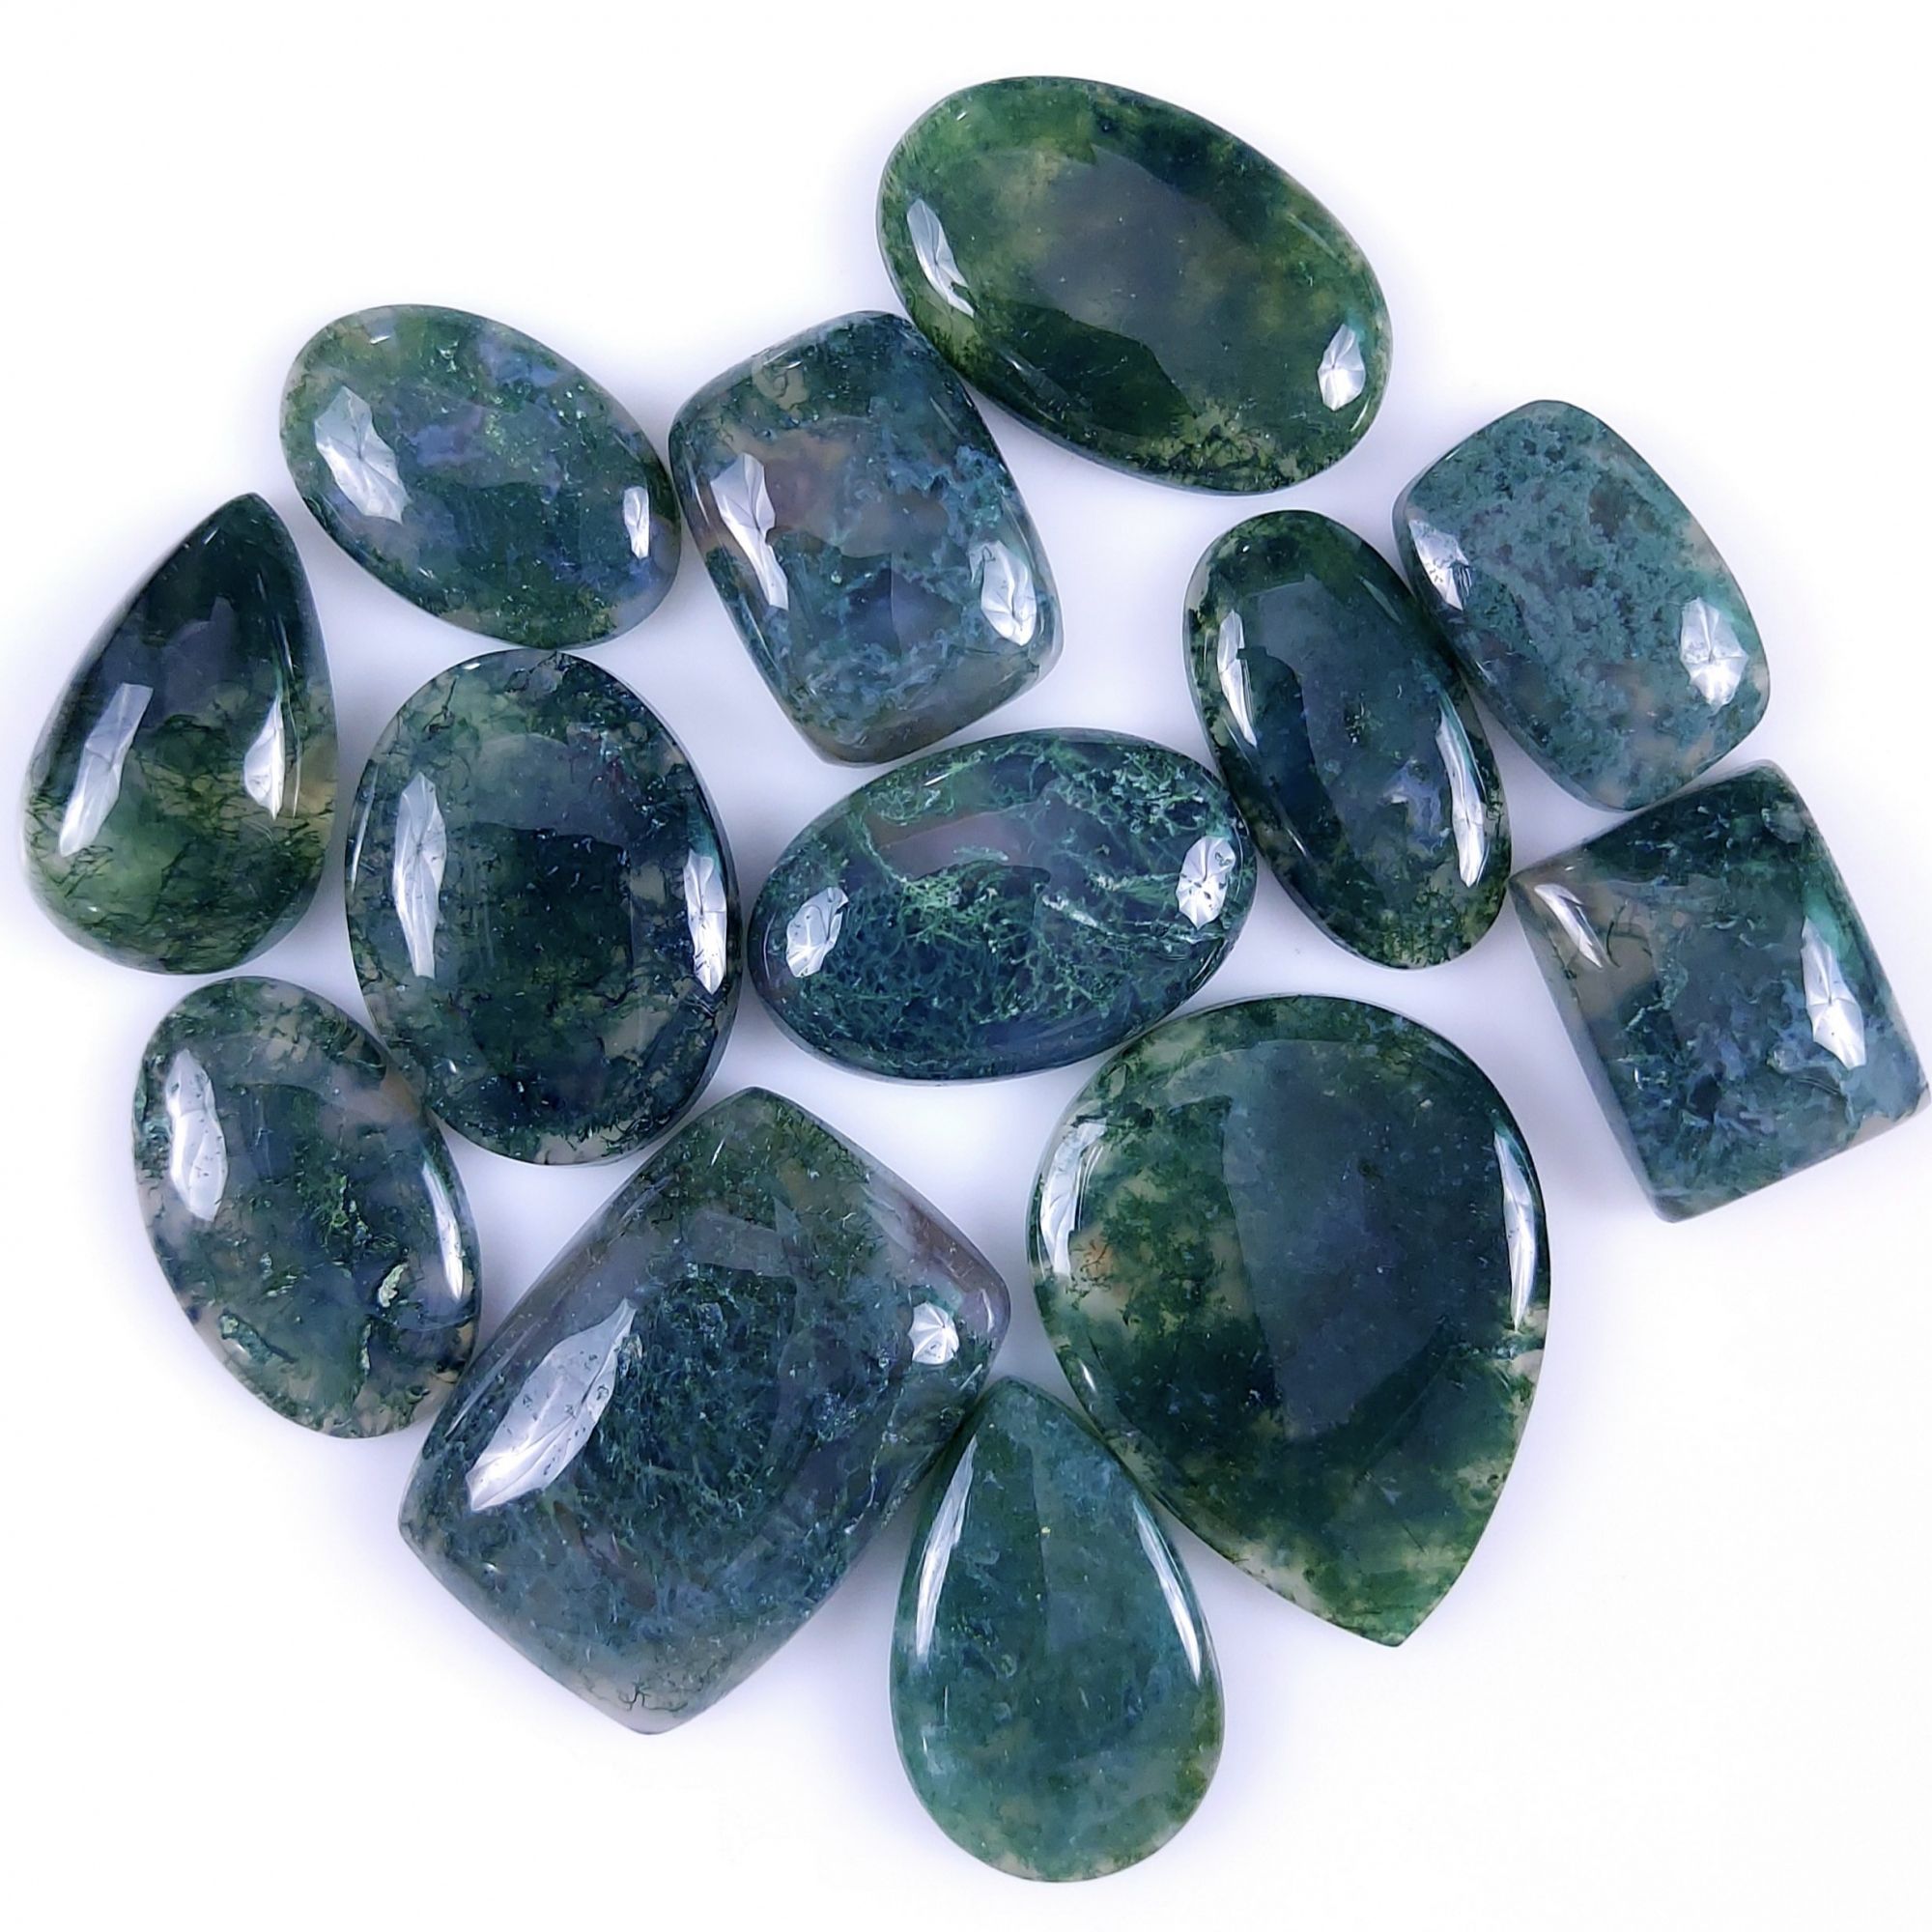 16Pcs 176Cts Natural Green Moss Agate Cabochon Lots Mixed Shapes And Sizes Moss Agate loose gemstone Cabochon Wholesale Lot 22x15 15x10mm #8082